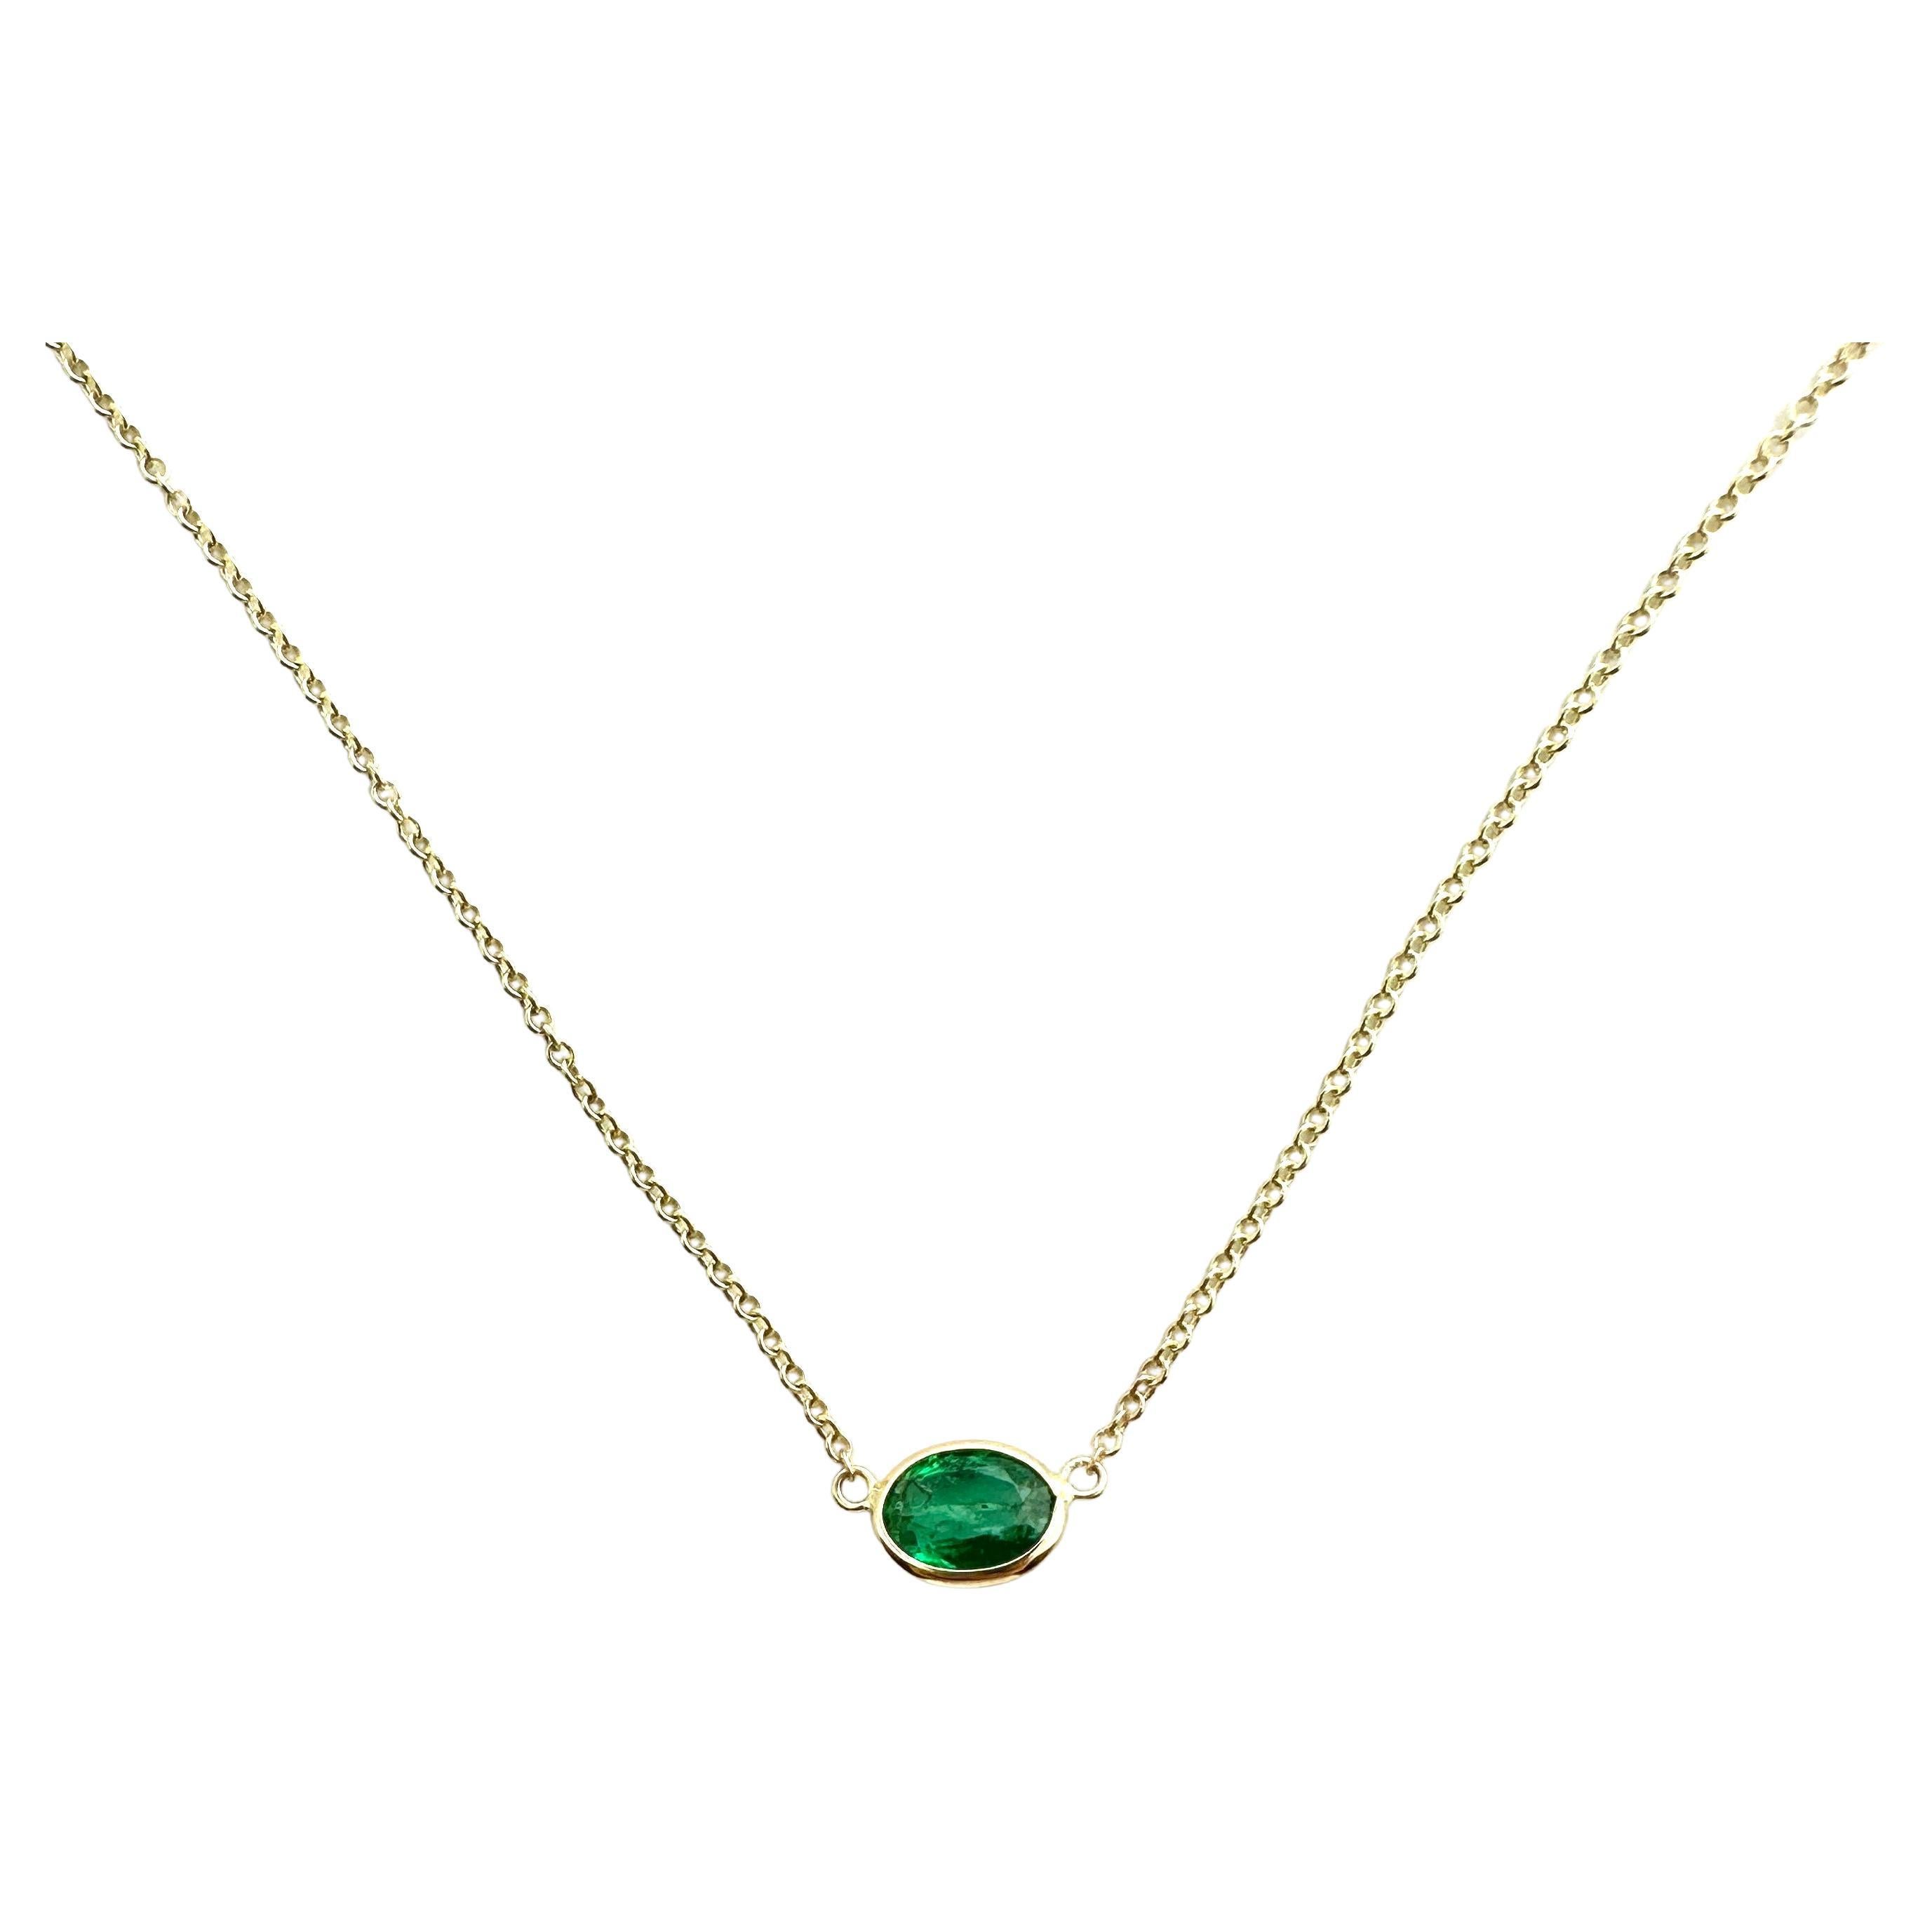 0.97 Carat Emerald Green Oval & Fashion Necklaces In 14K Yellow Gold